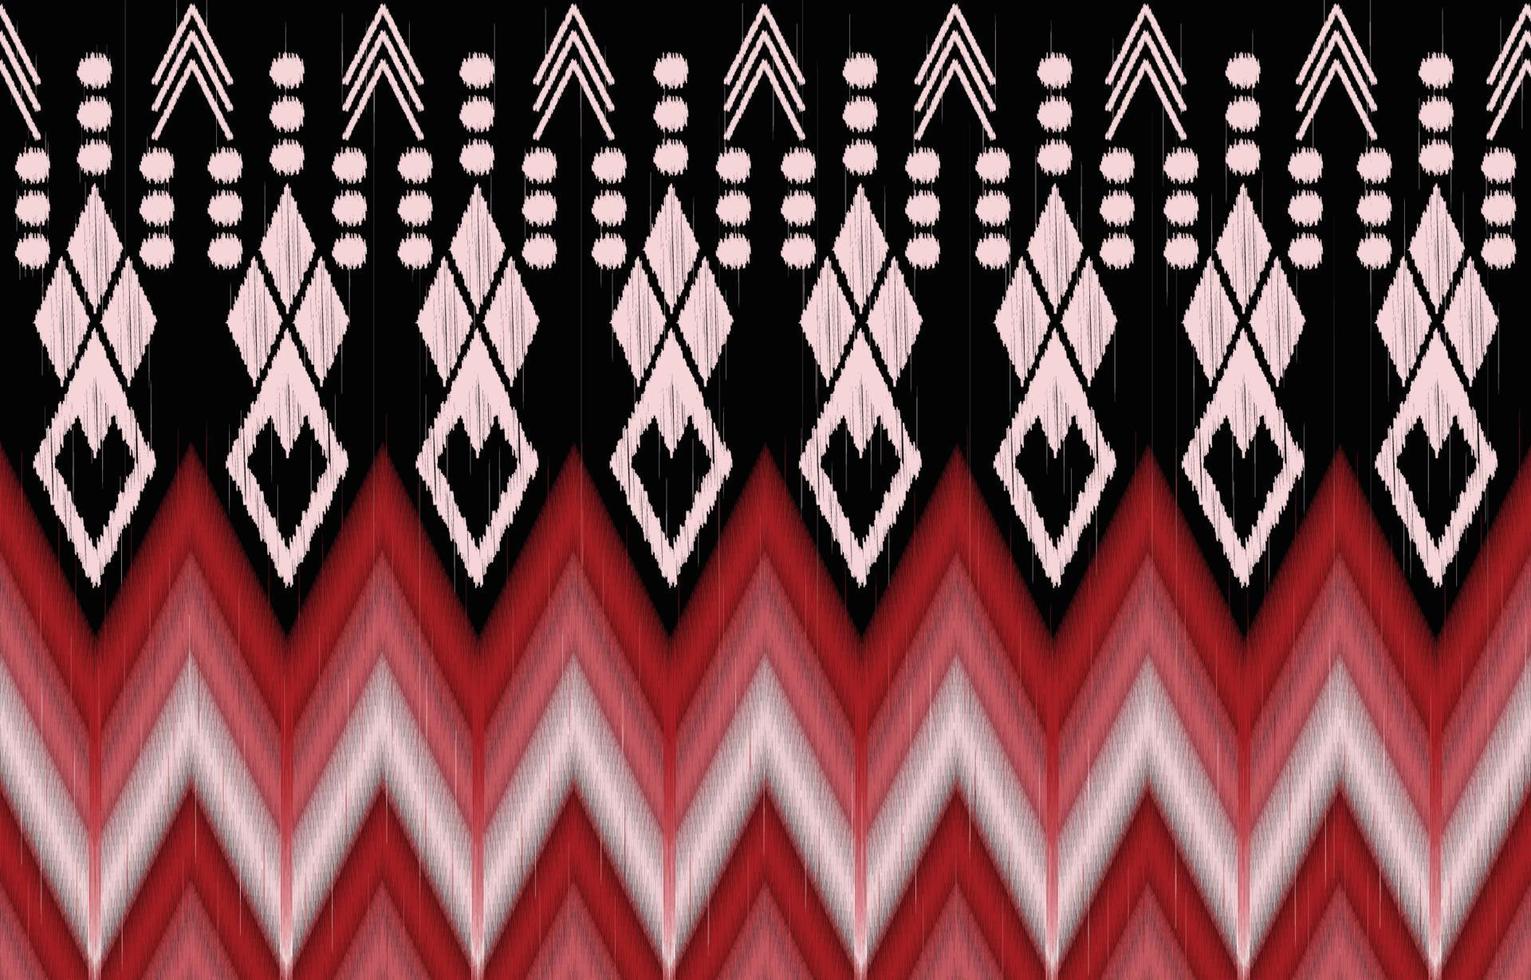 Abstract ikat seamless ethnic native aztec pattern oriental traditional embroidery style. Design geometric ikat print for clothing, fabric, batik, carpet, curtain, wallpaper, textile, background. vector